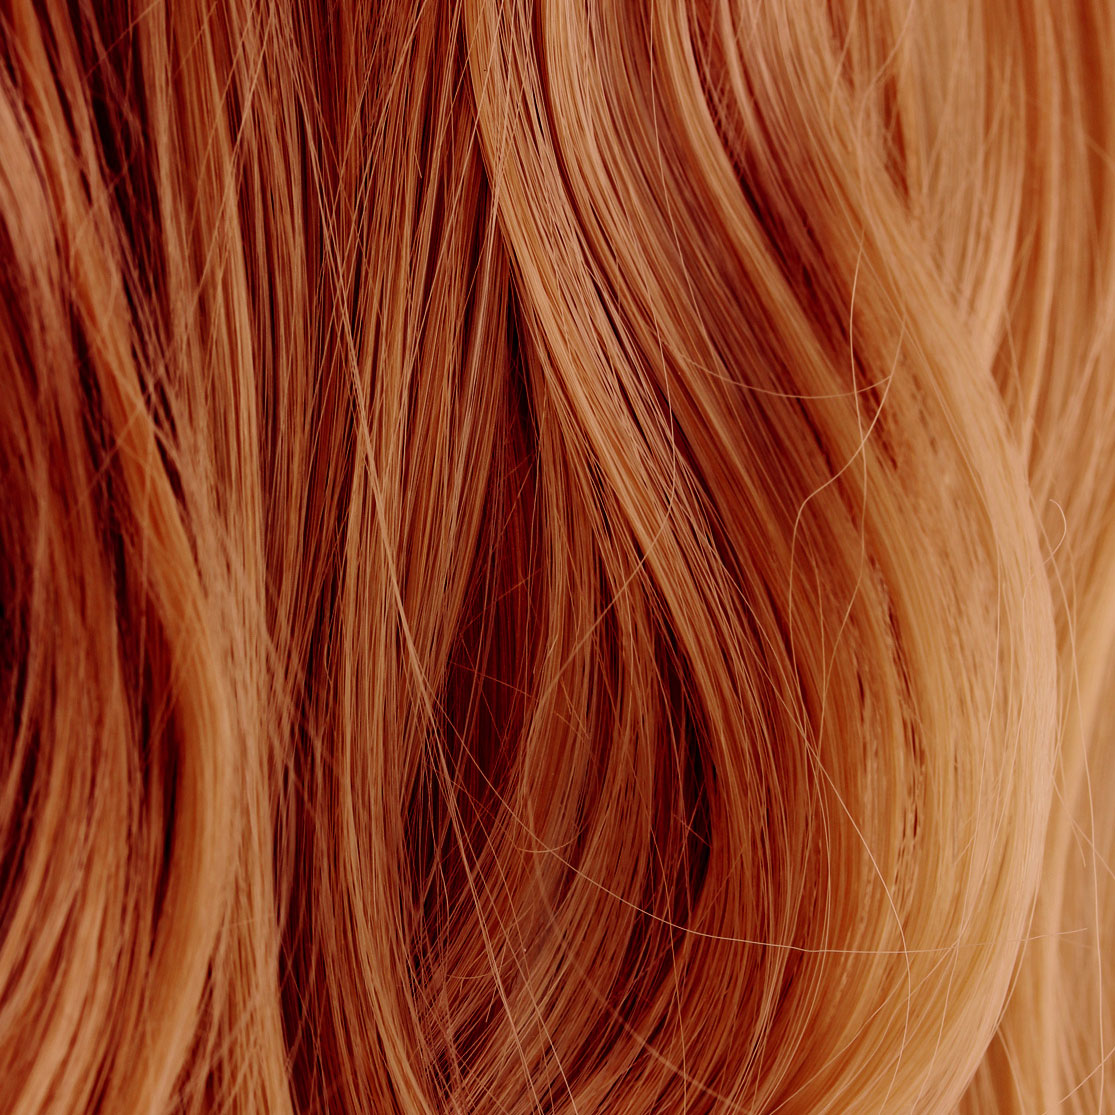 Ginger Blonde Henna Hair Dye Henna Color Lab Henna Effy Moom Free Coloring Picture wallpaper give a chance to color on the wall without getting in trouble! Fill the walls of your home or office with stress-relieving [effymoom.blogspot.com]